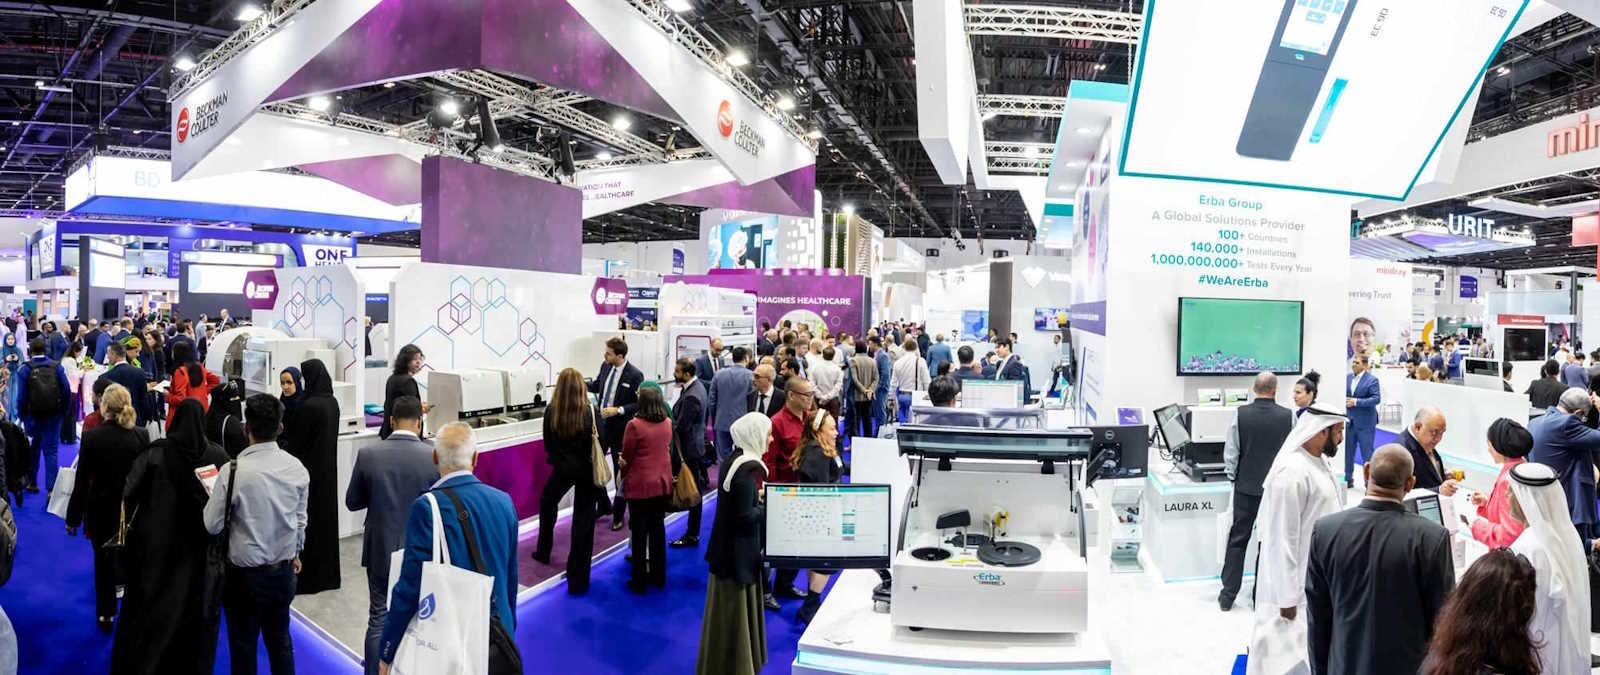 Laboratory Equipment sector in the UAE Foresees Growth up to $1.5B by 2027: Grand View Research report